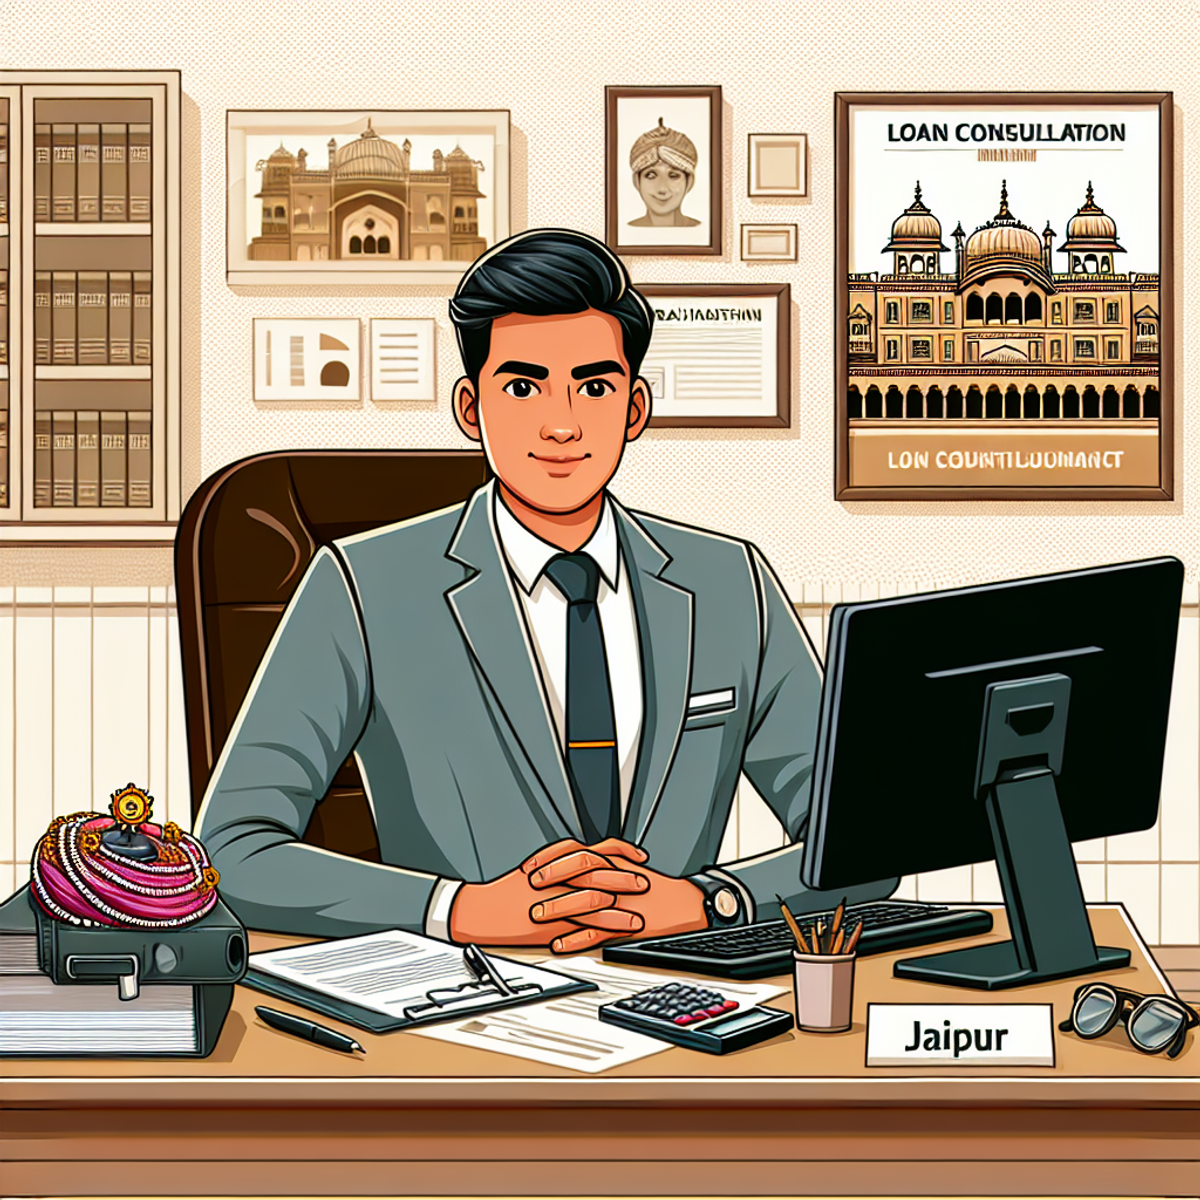 A South Asian male professional loan consultant sitting at a desk filled with paperwork, calculator, computer, and brochures in an office space with Rajasthan traditional decor elements.